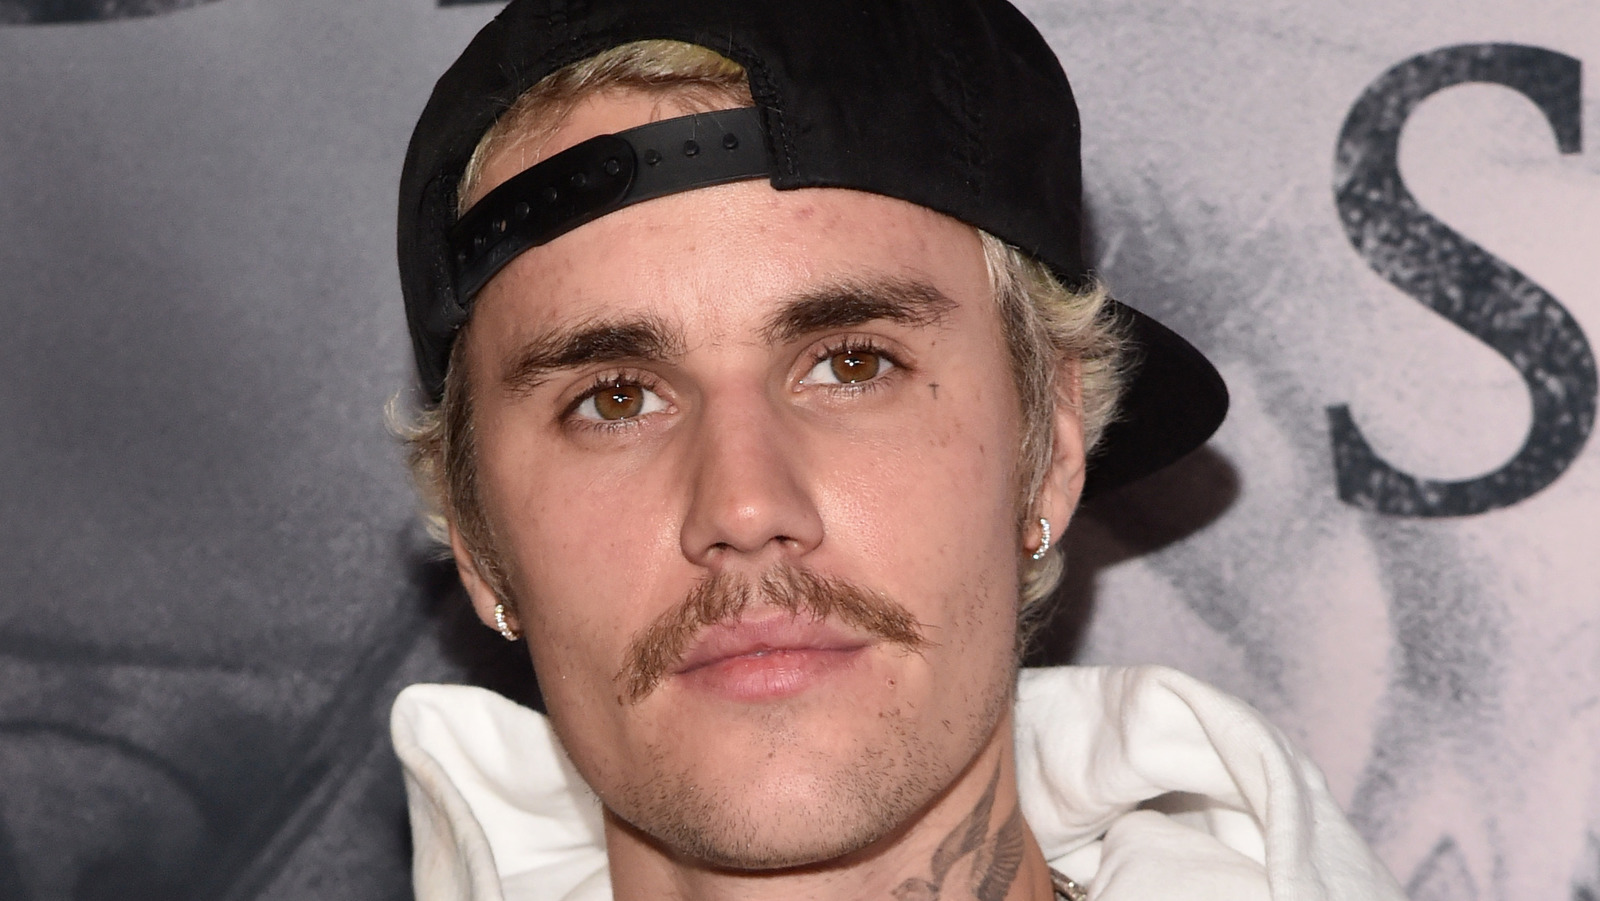 Justin Bieber Reveals He's Growing Out His Hair To Look Like This Star